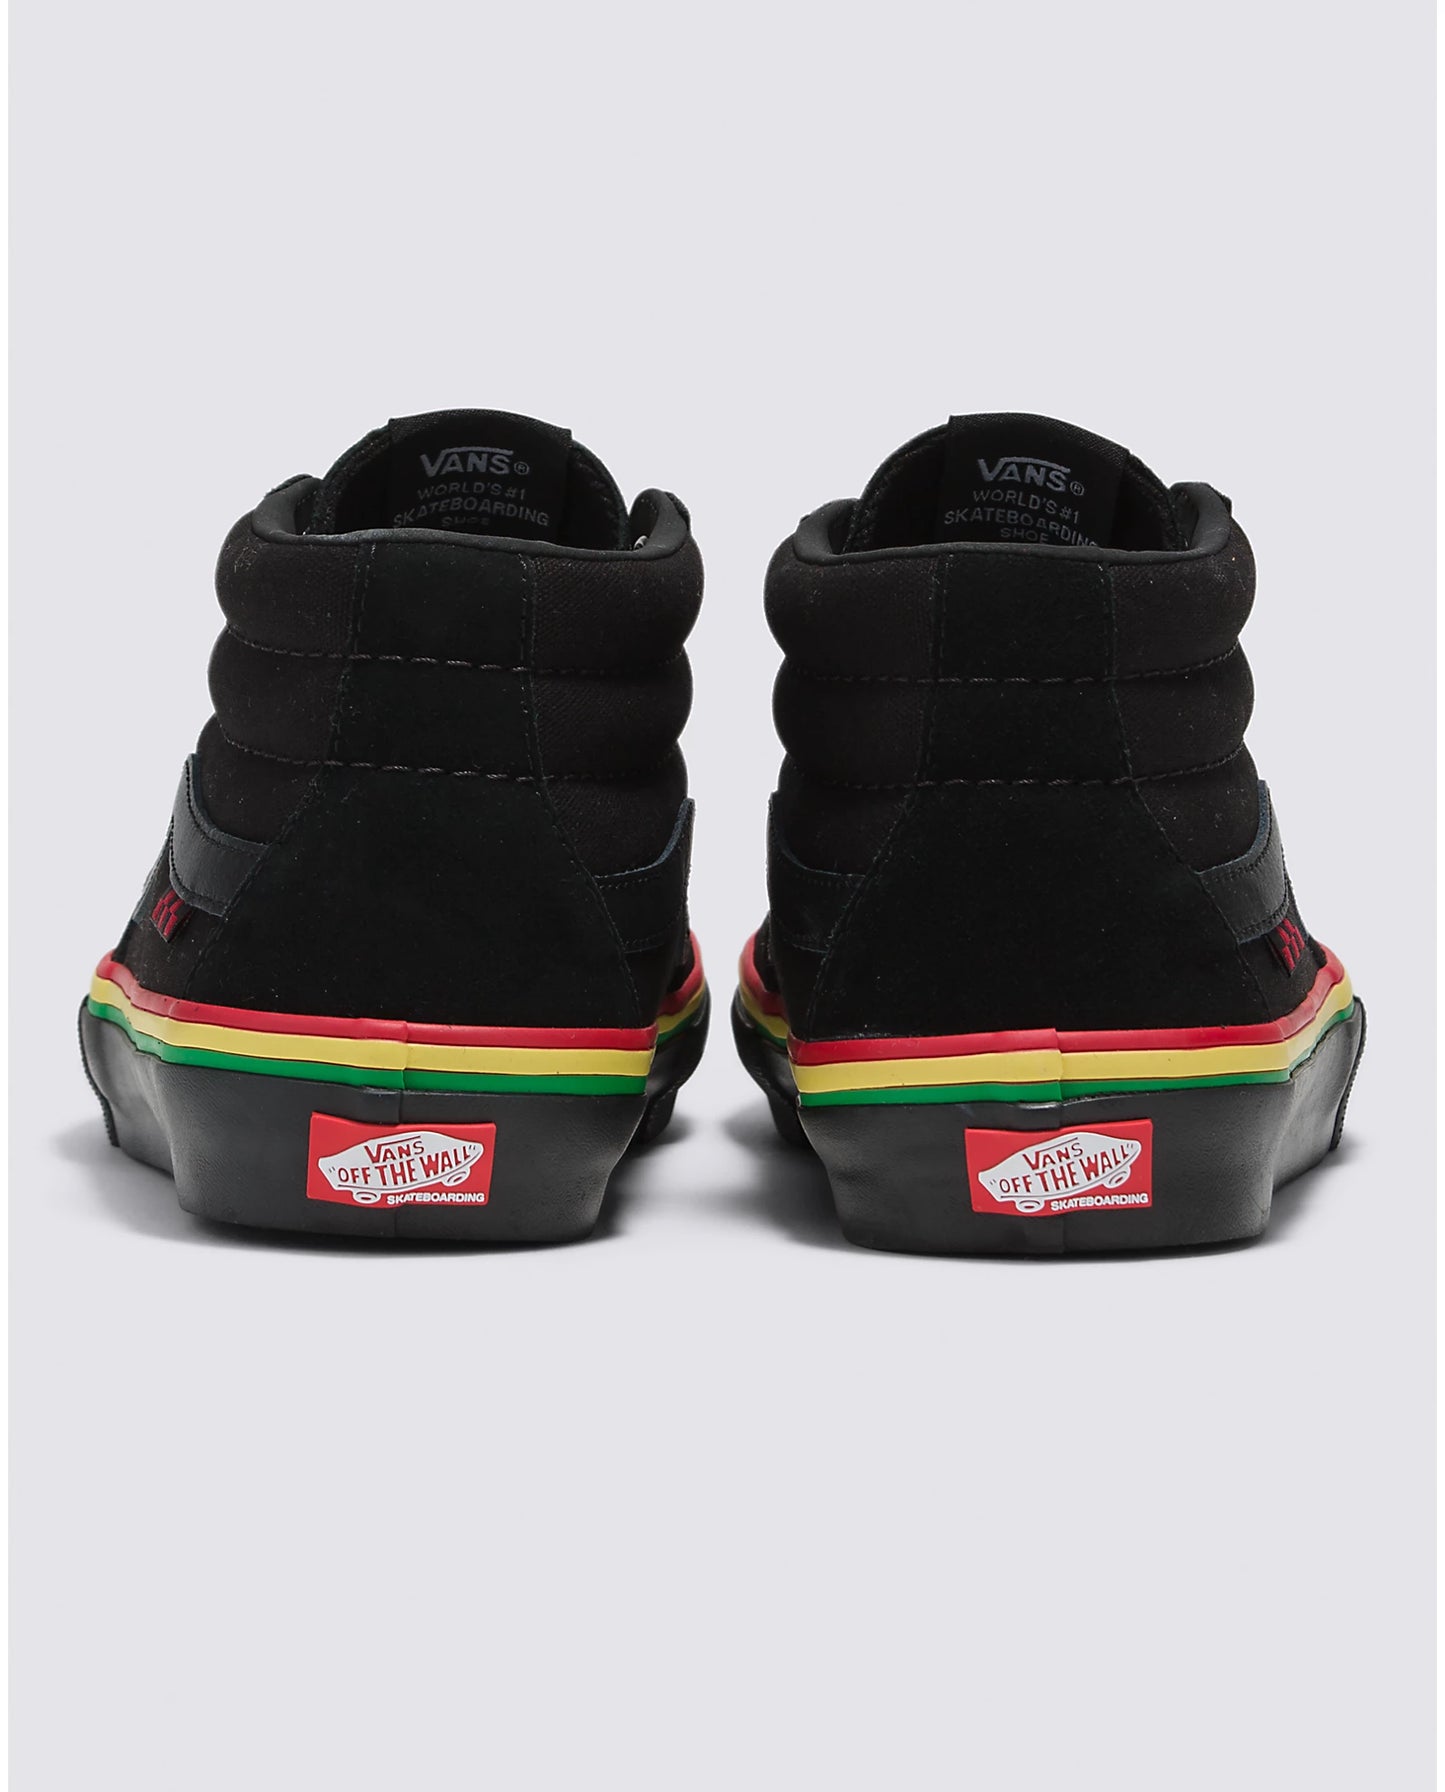 Rasta Skate Grosso Mid Shoe Blk(size options listed)